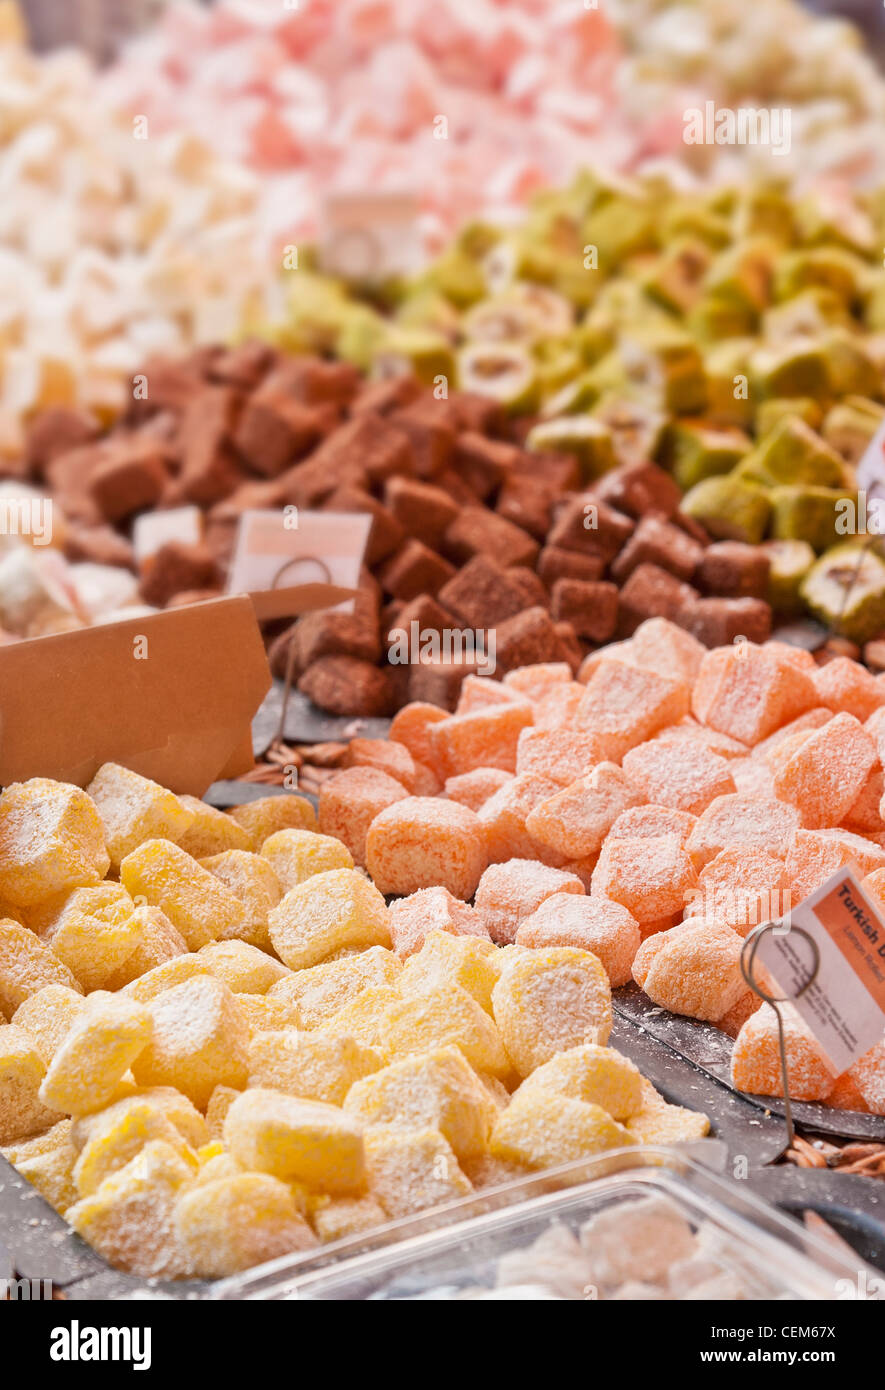 Bright and colourful selection of Turkish delight on a market stall Stock Photo